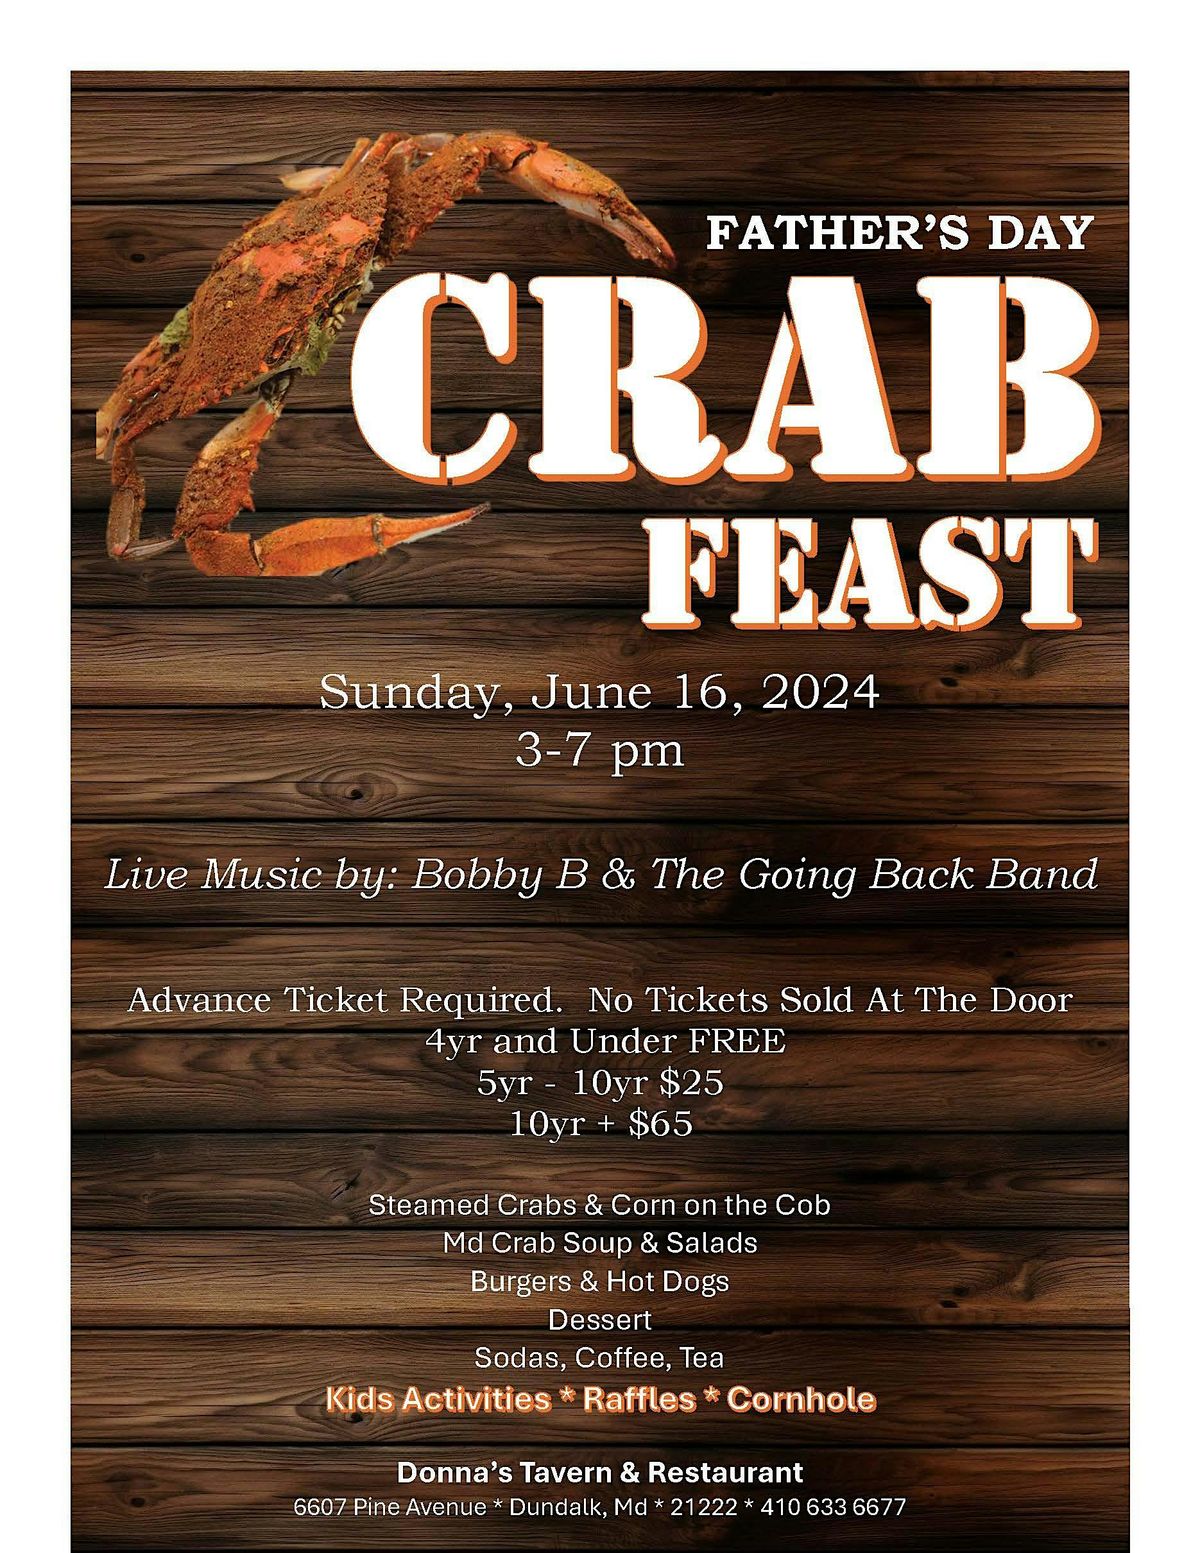 Father's Day Crab Feast